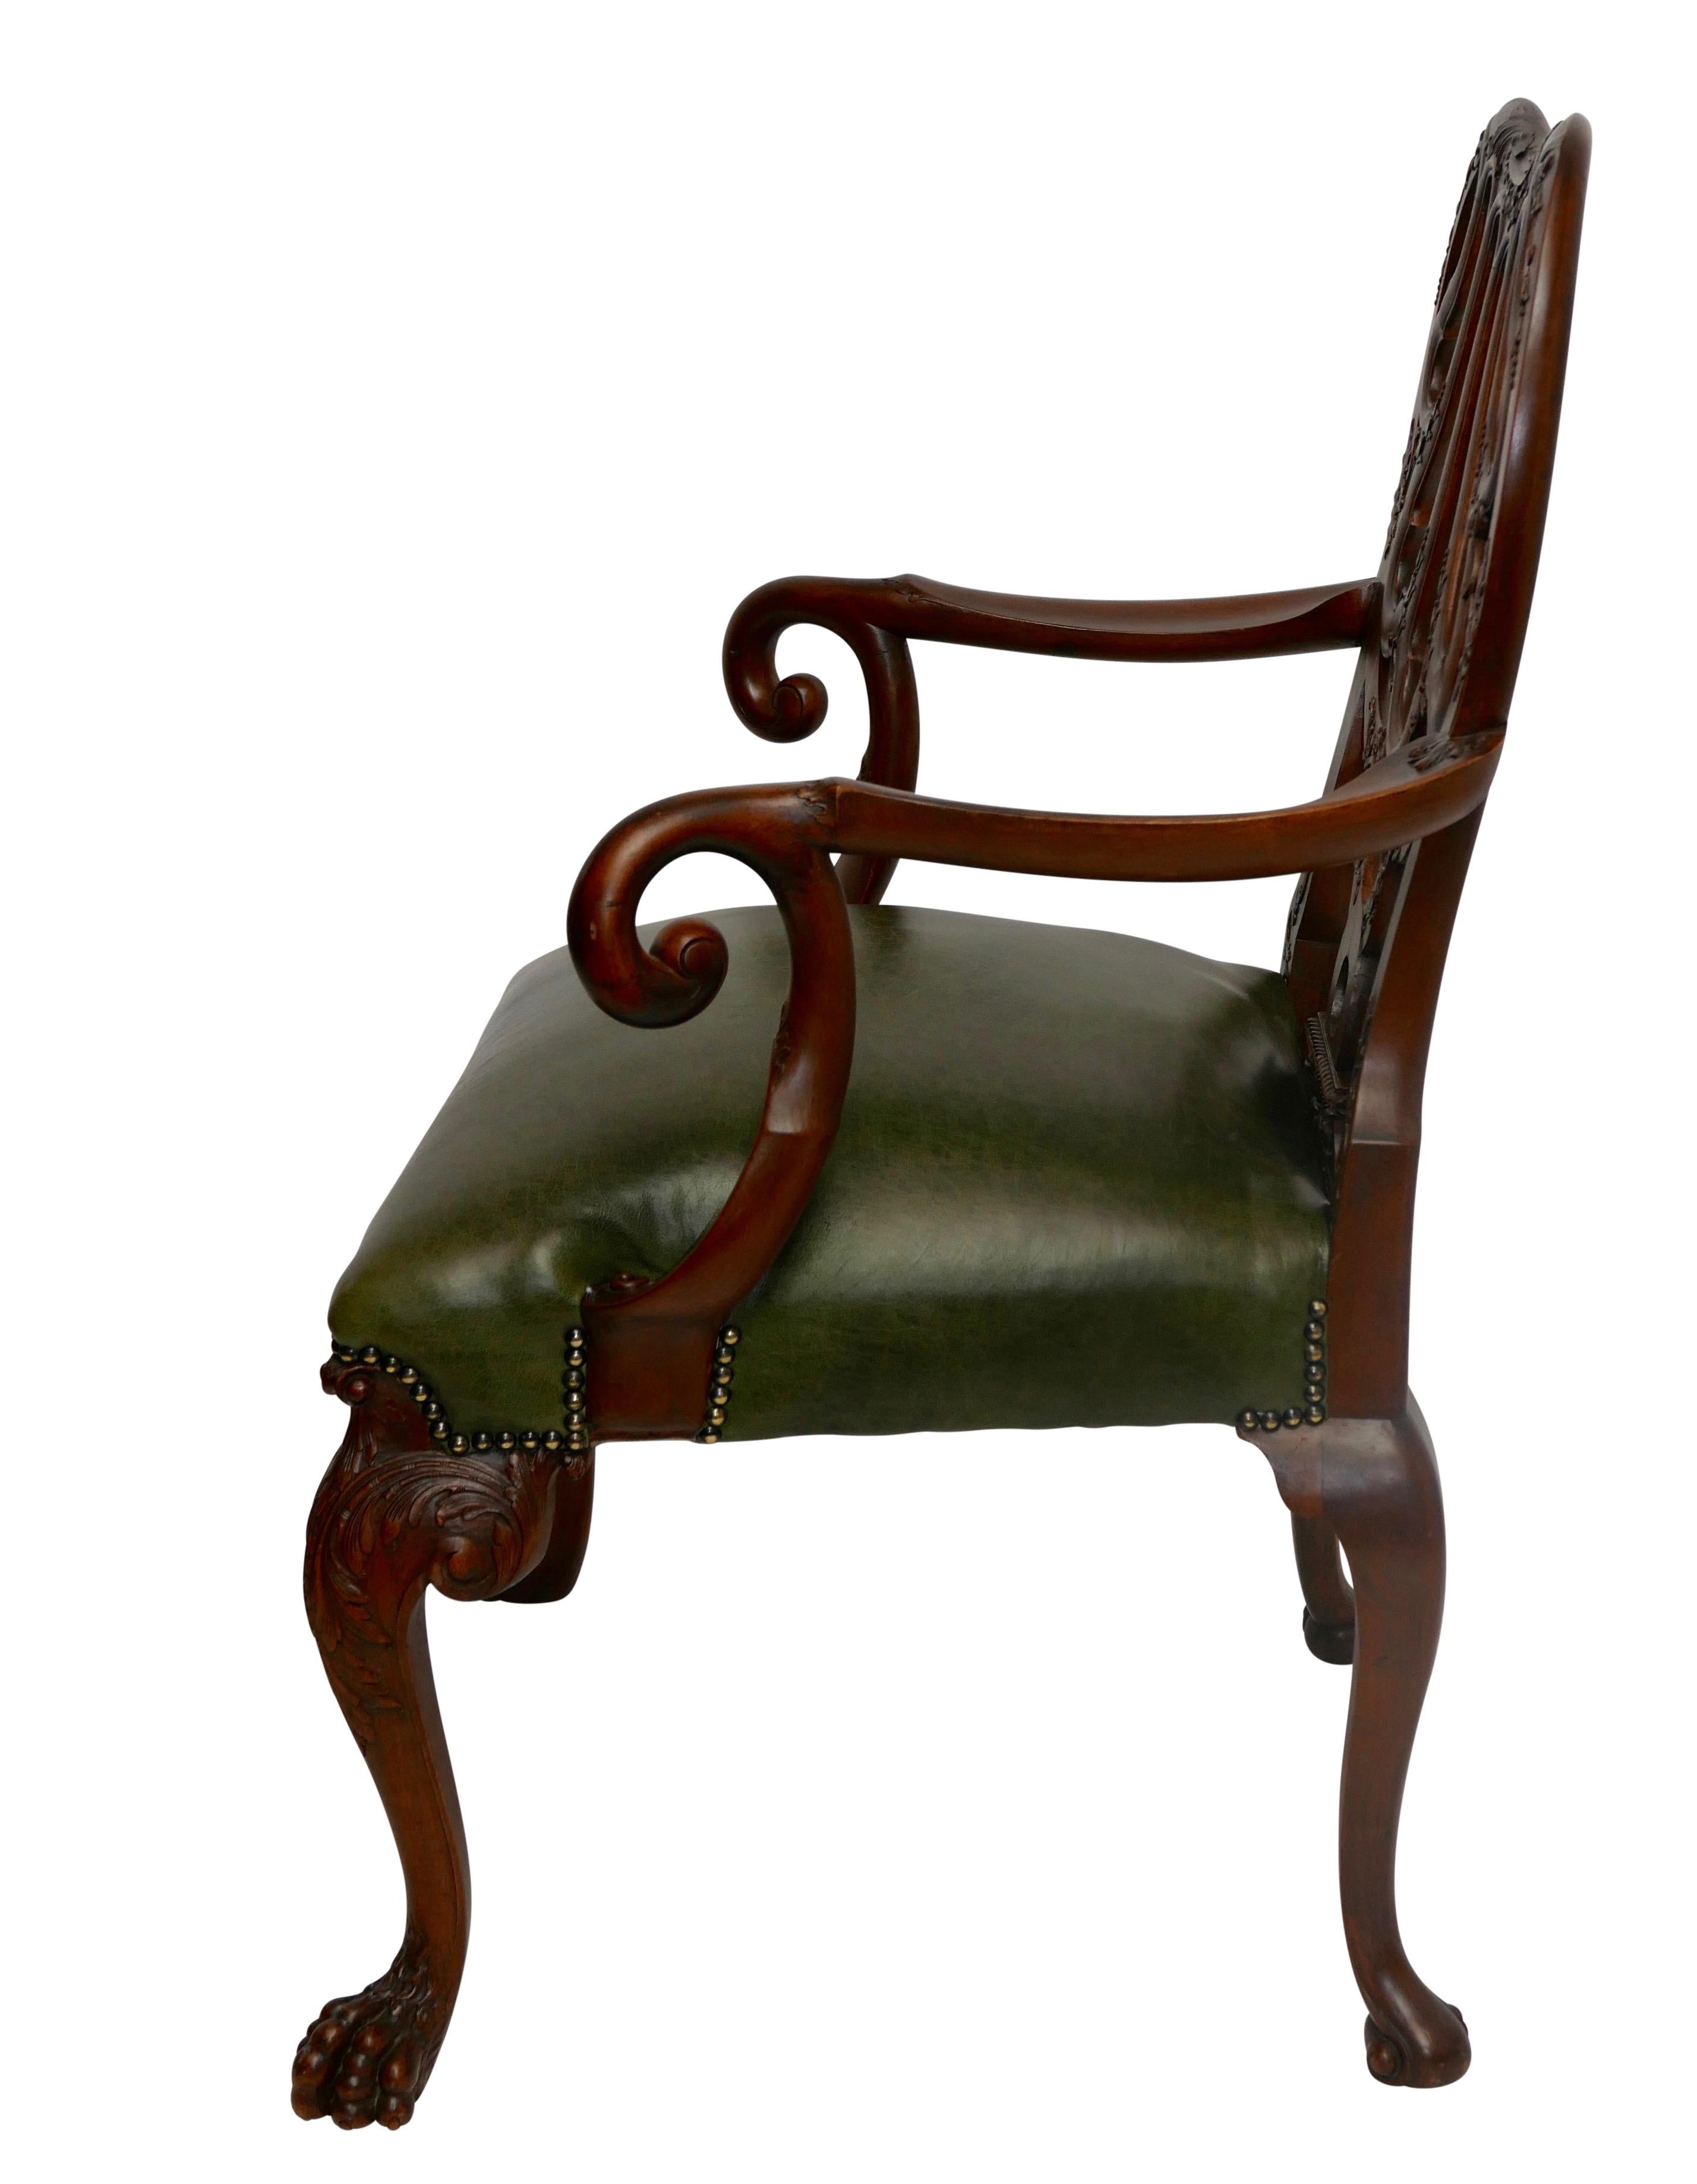 Walnut and Leather Armchair Desk Chair after Giles Grendey, Late 19th Century For Sale 1